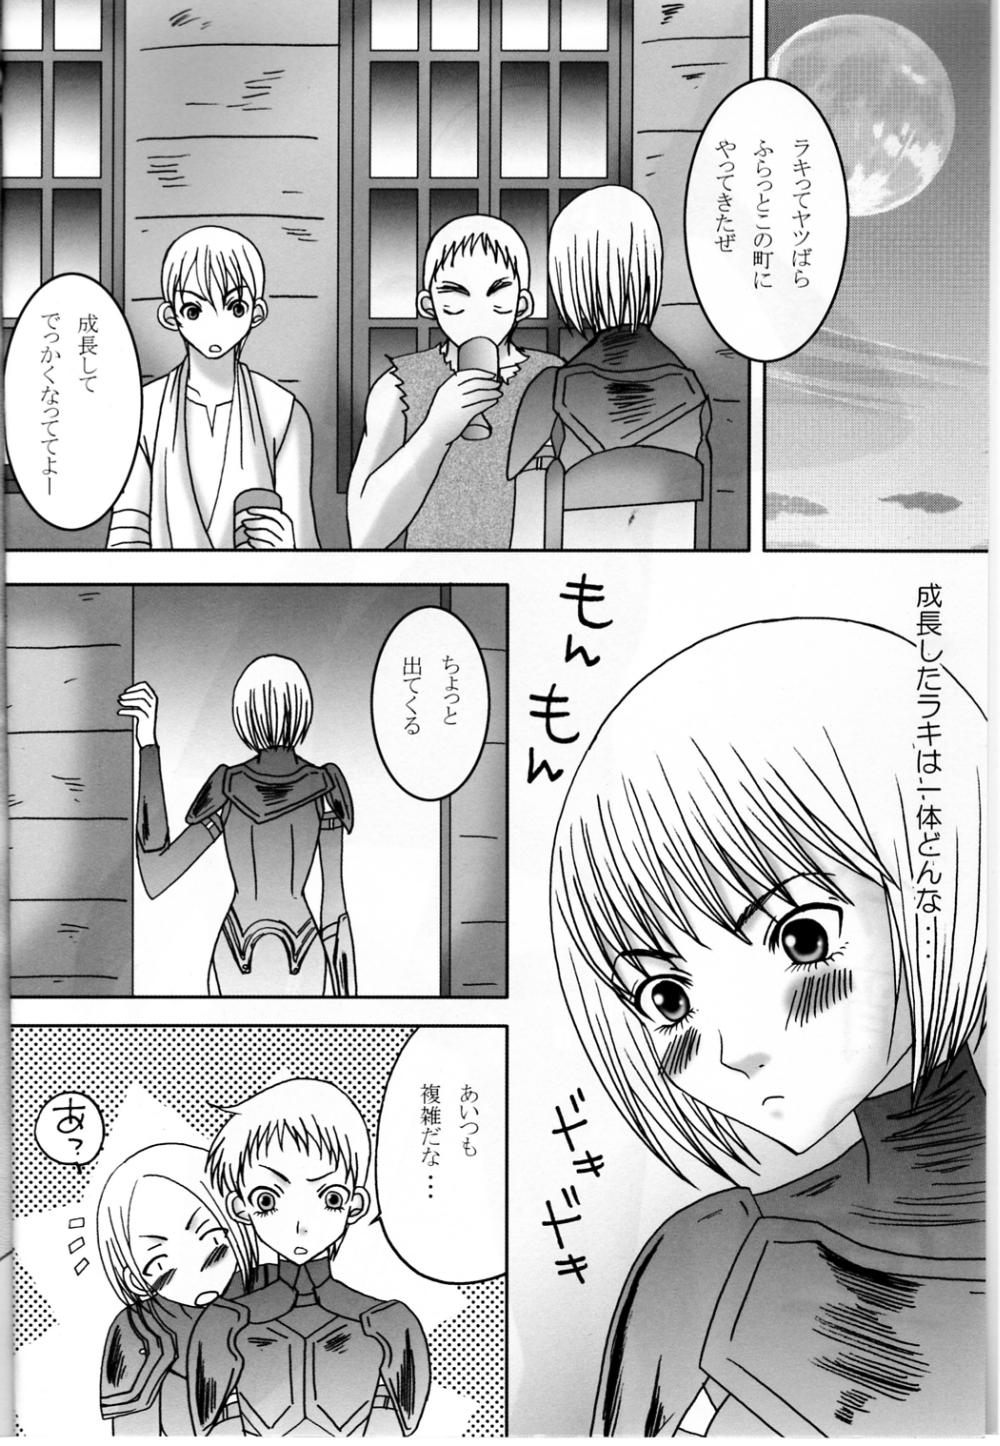 Group Koyoi no Utage - Claymore Oldvsyoung - Page 3